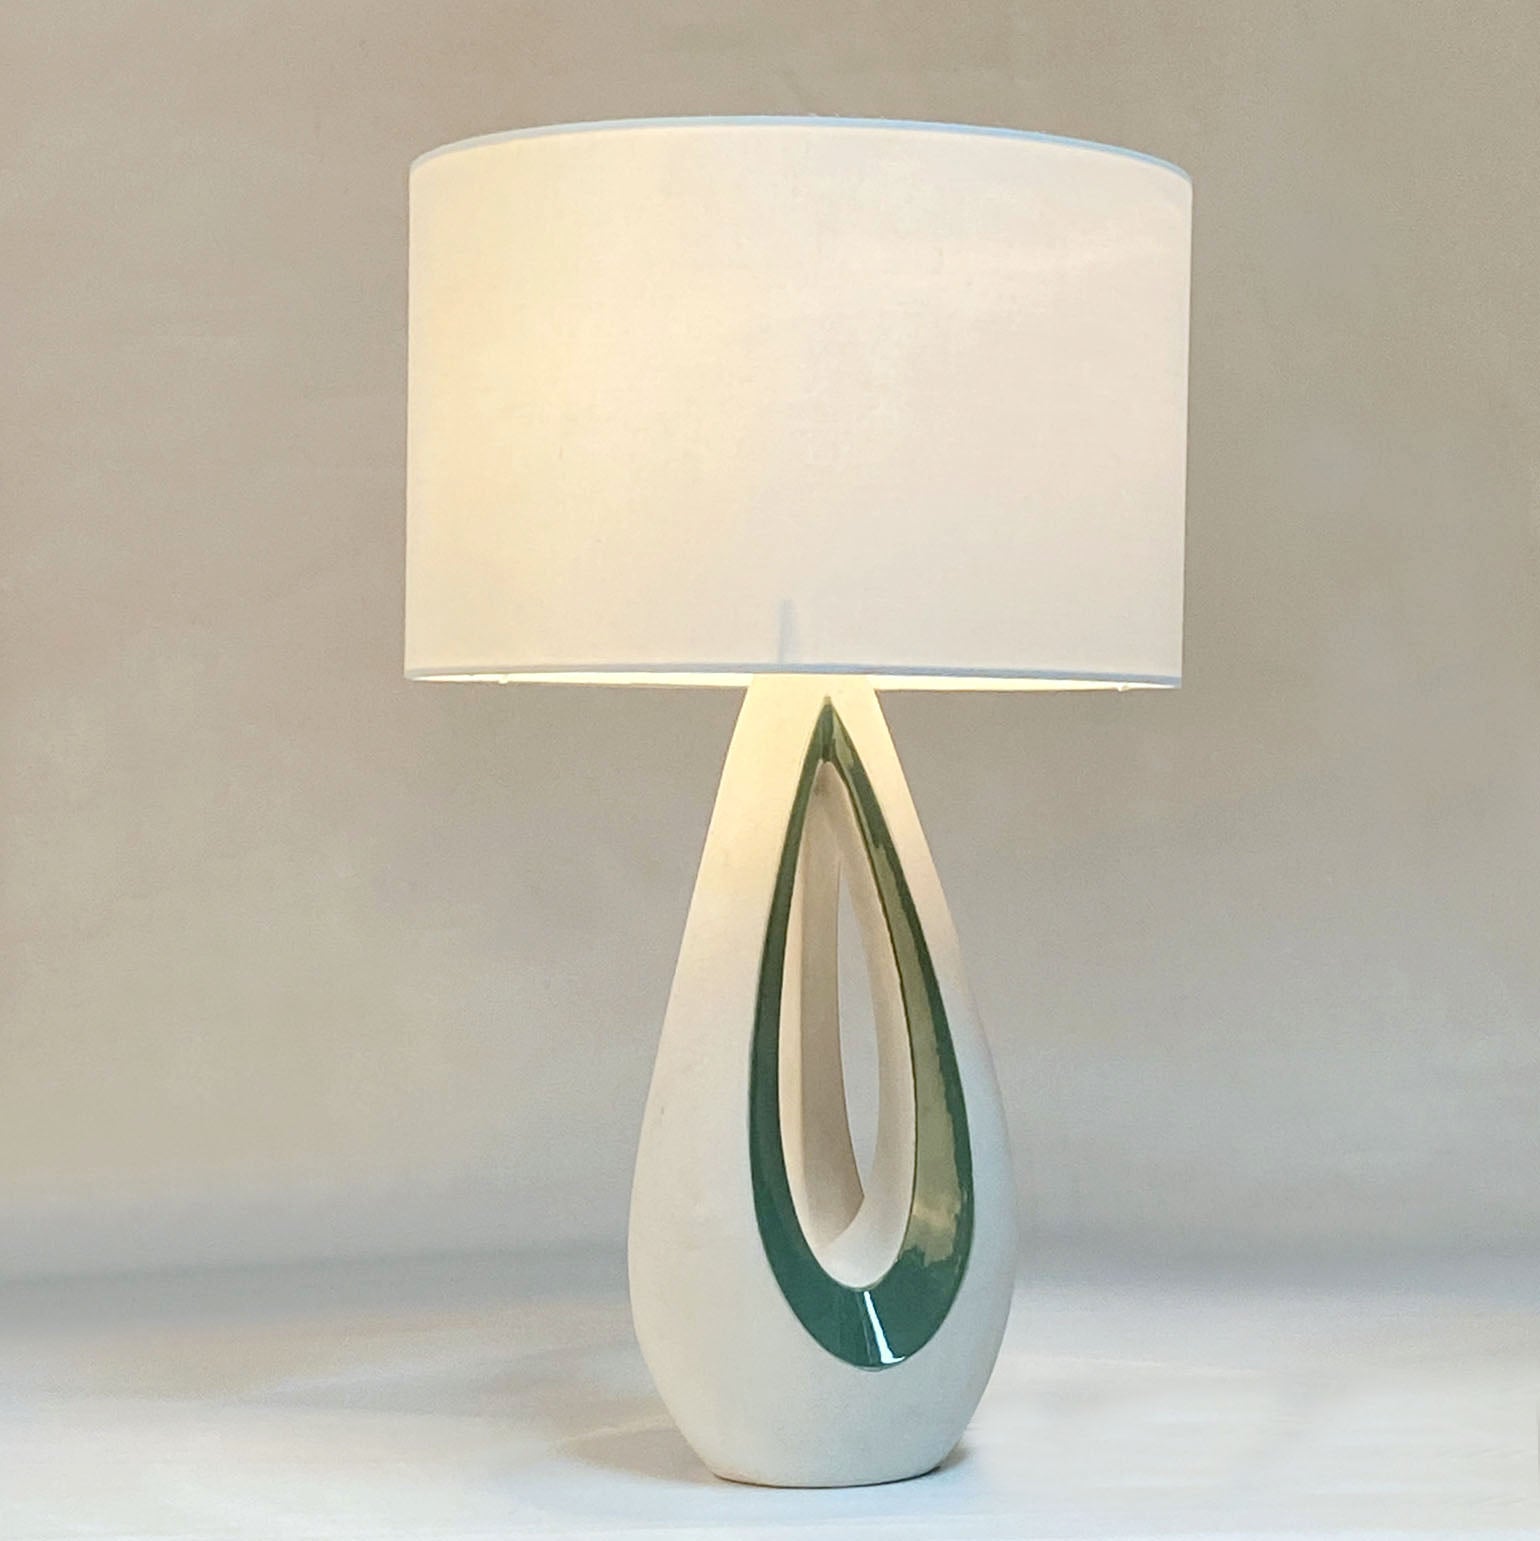 Elegant sculptural ceramic 1950's French table lamp in white and green glaze. The curves and openings in the shape of the base are accentuated by the green tear shape borders. The lamp comes with a cream drum lamp shade.

Dimensions Base; height 40